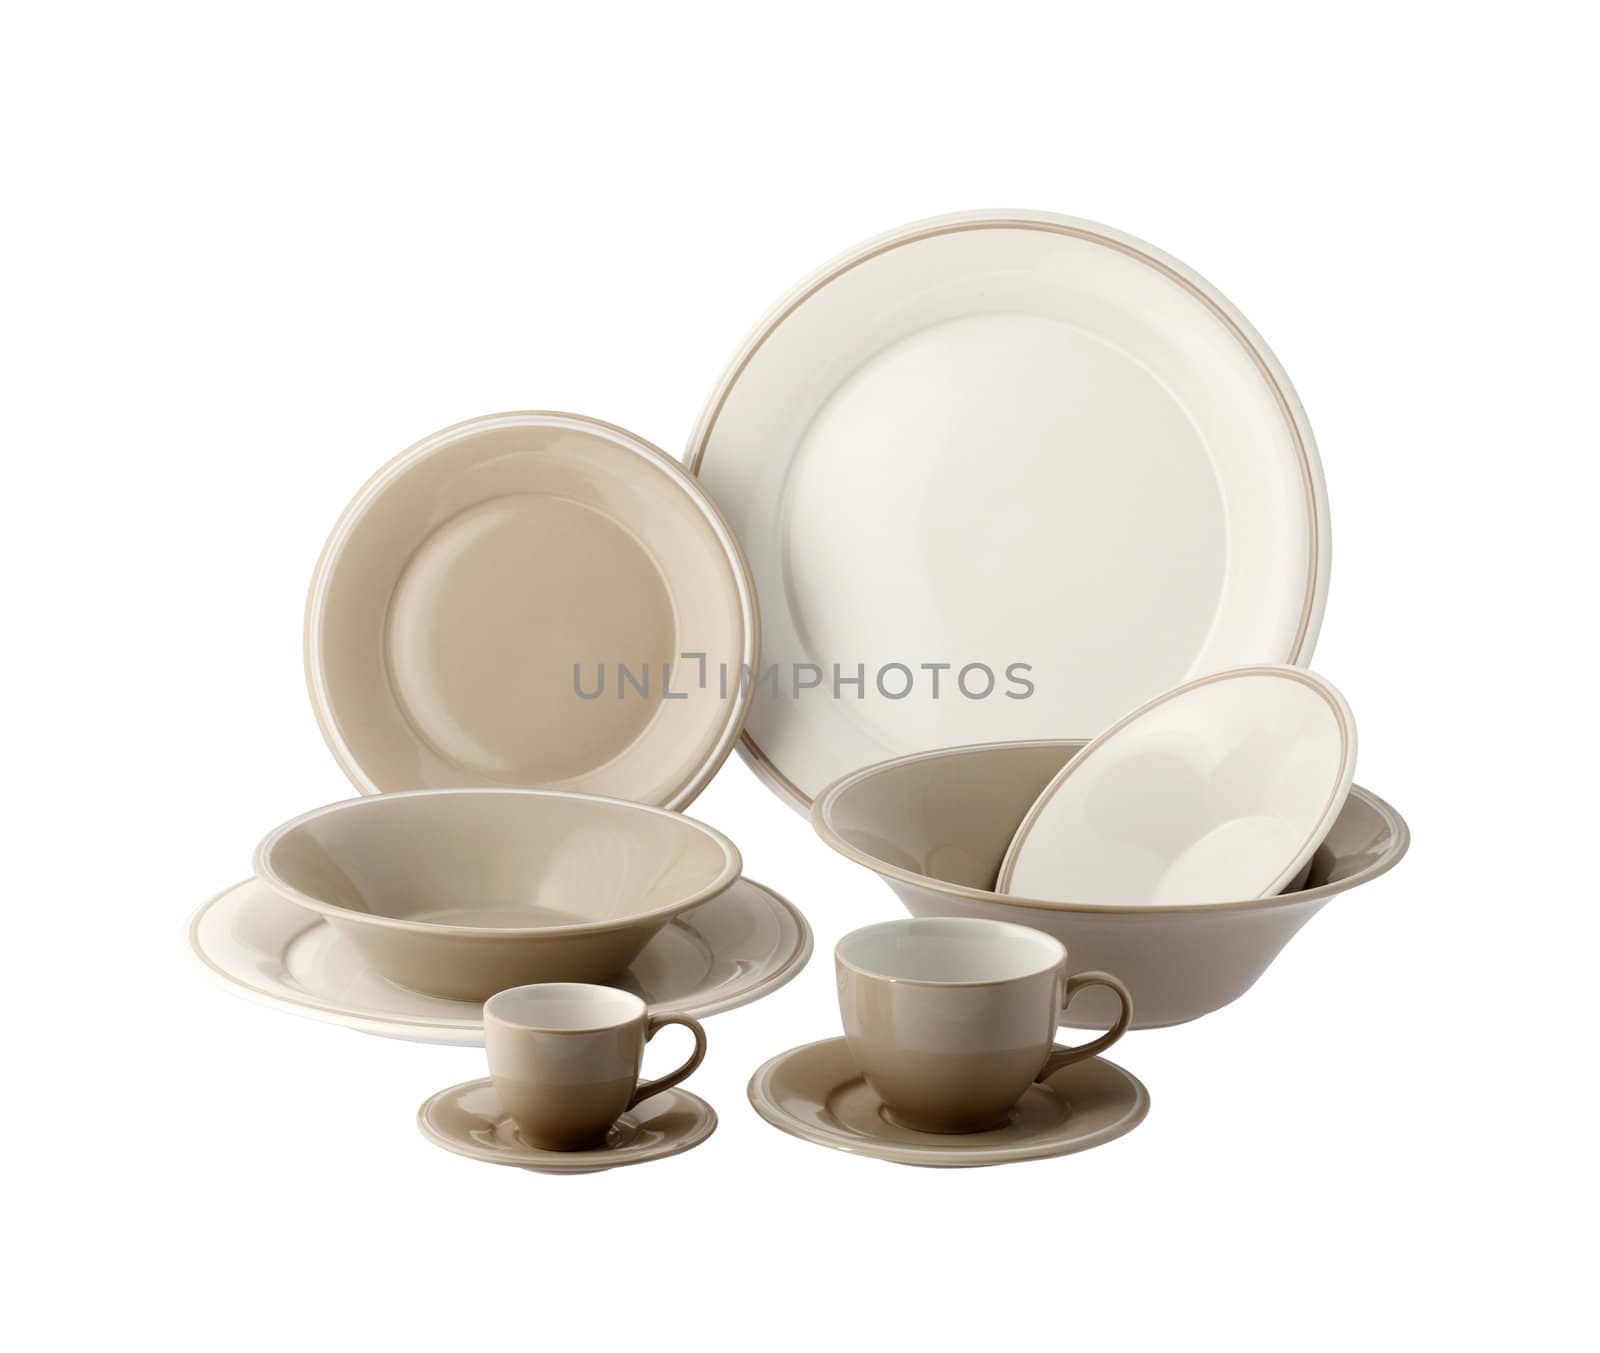 Set of colored Porcelain dishes, isolated on white background